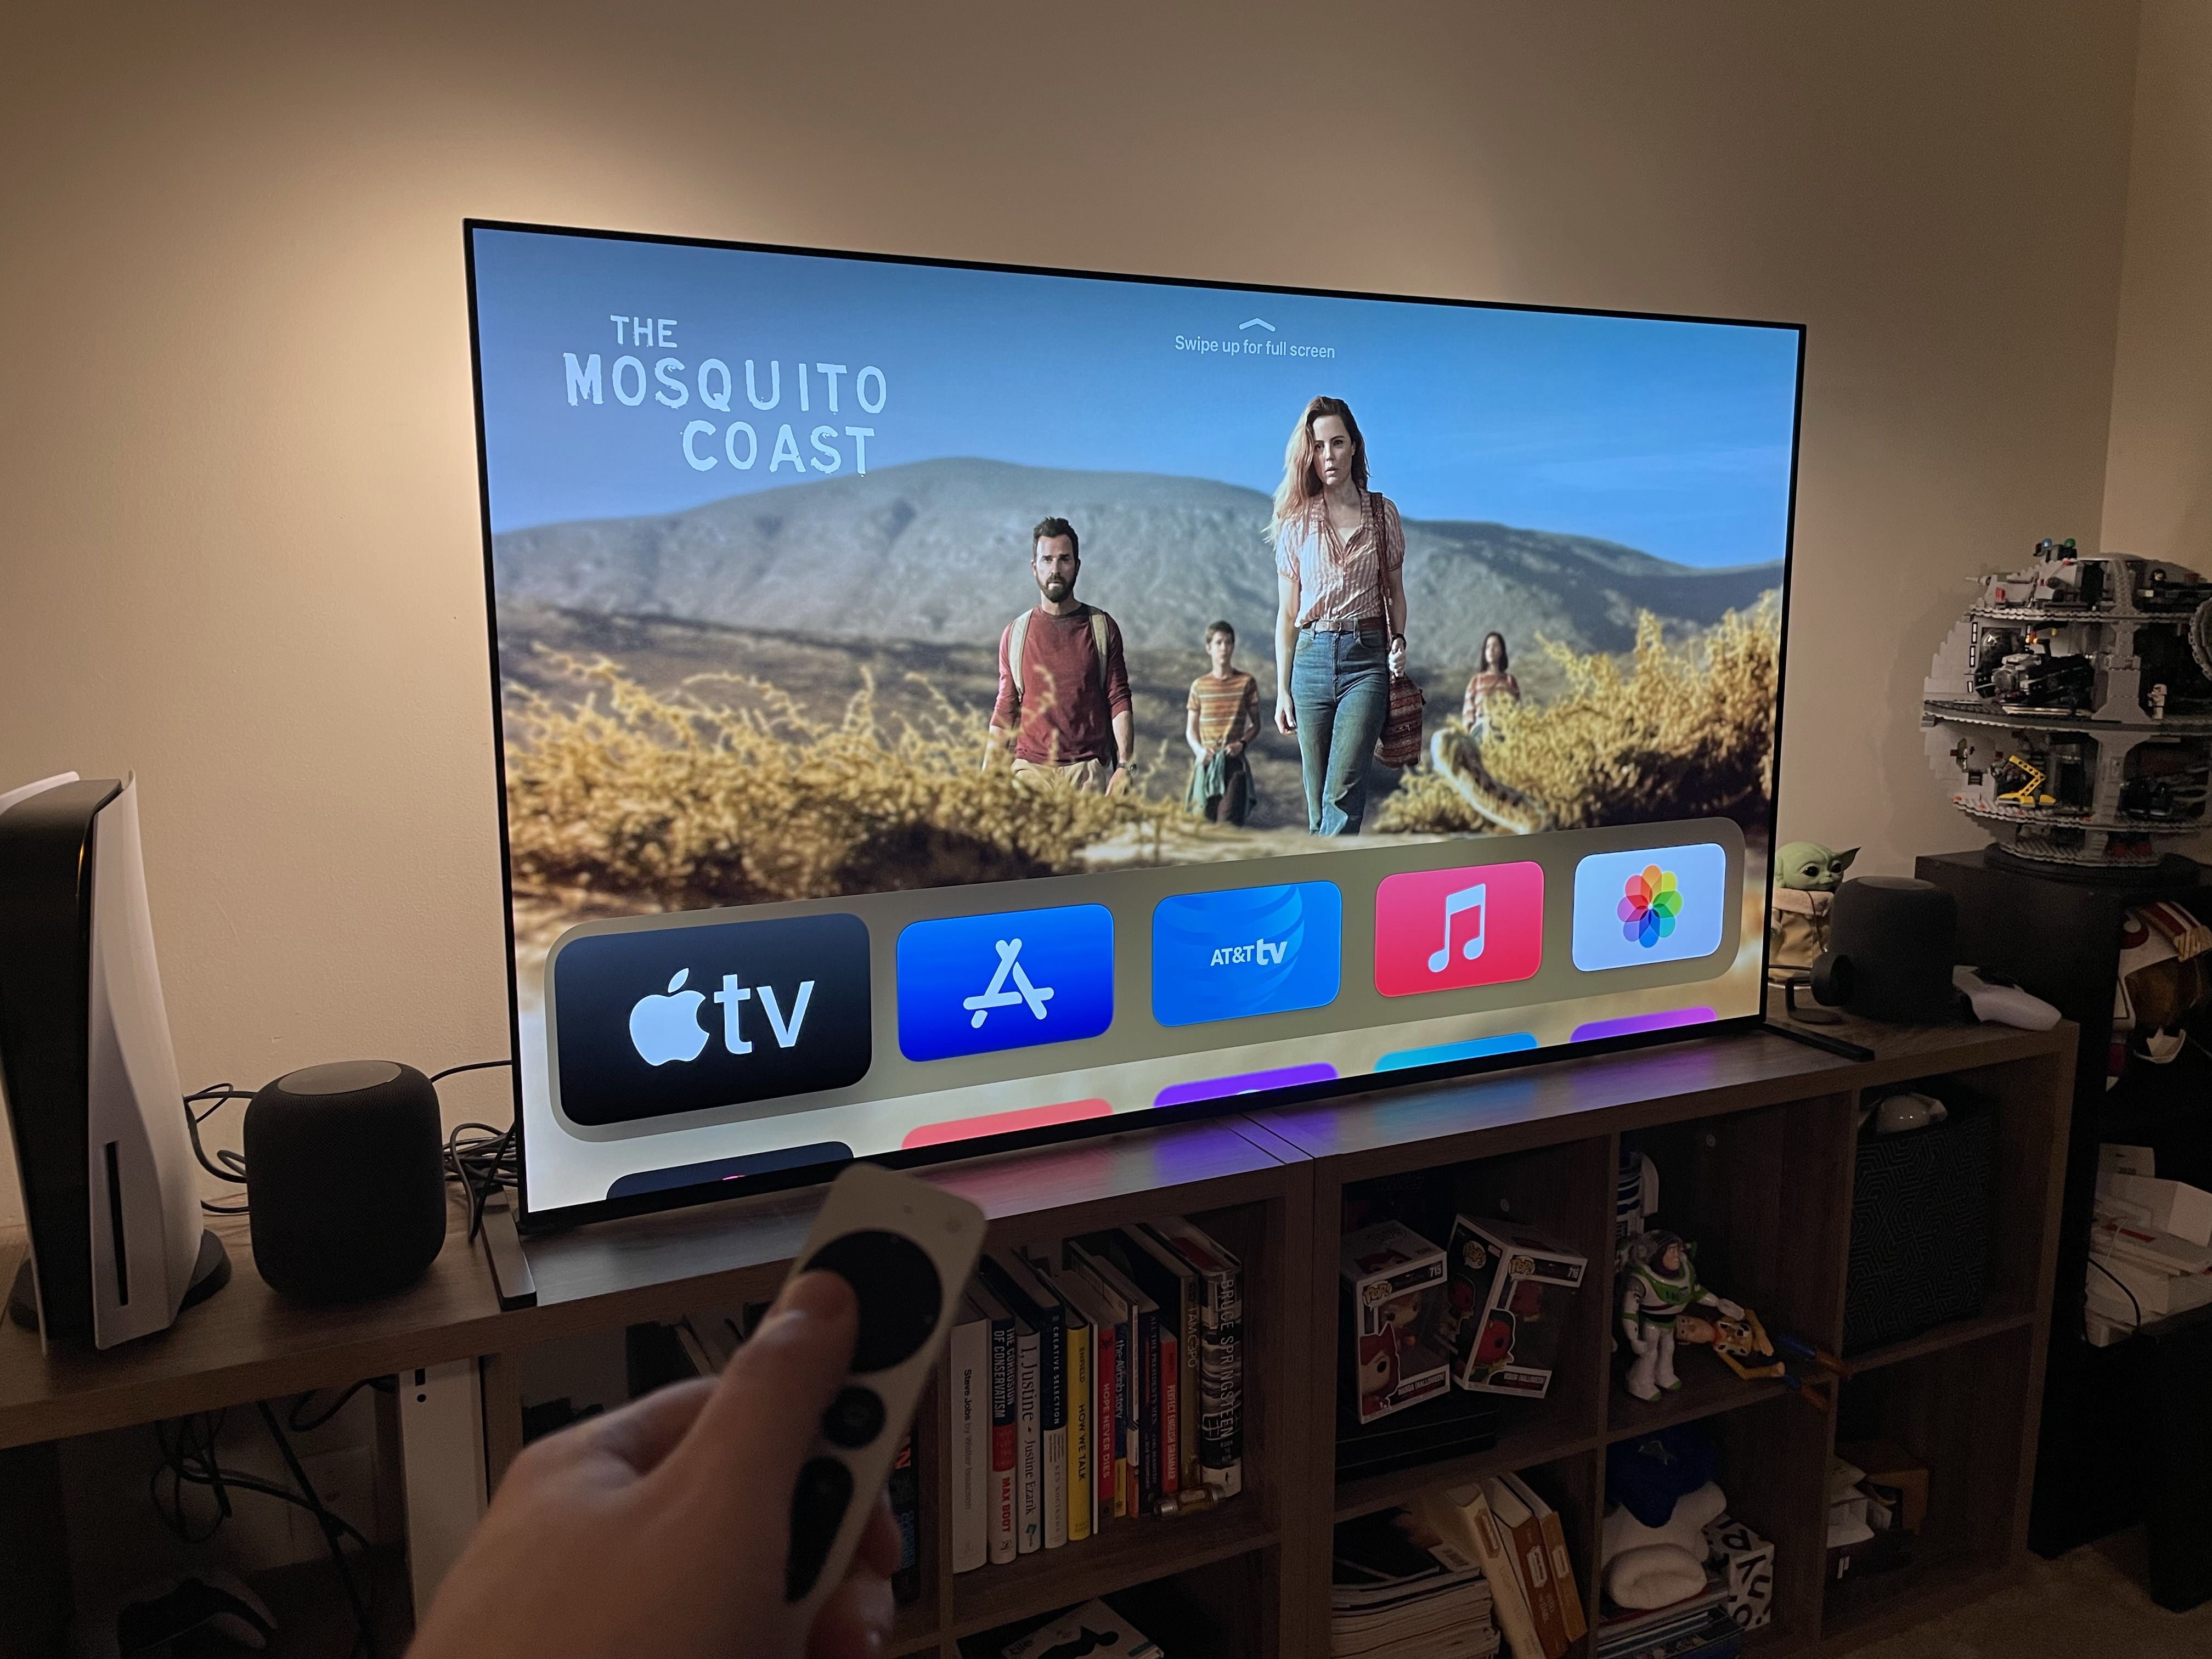 Apple TV 4K with new Siri Remote review: the remote steals the show